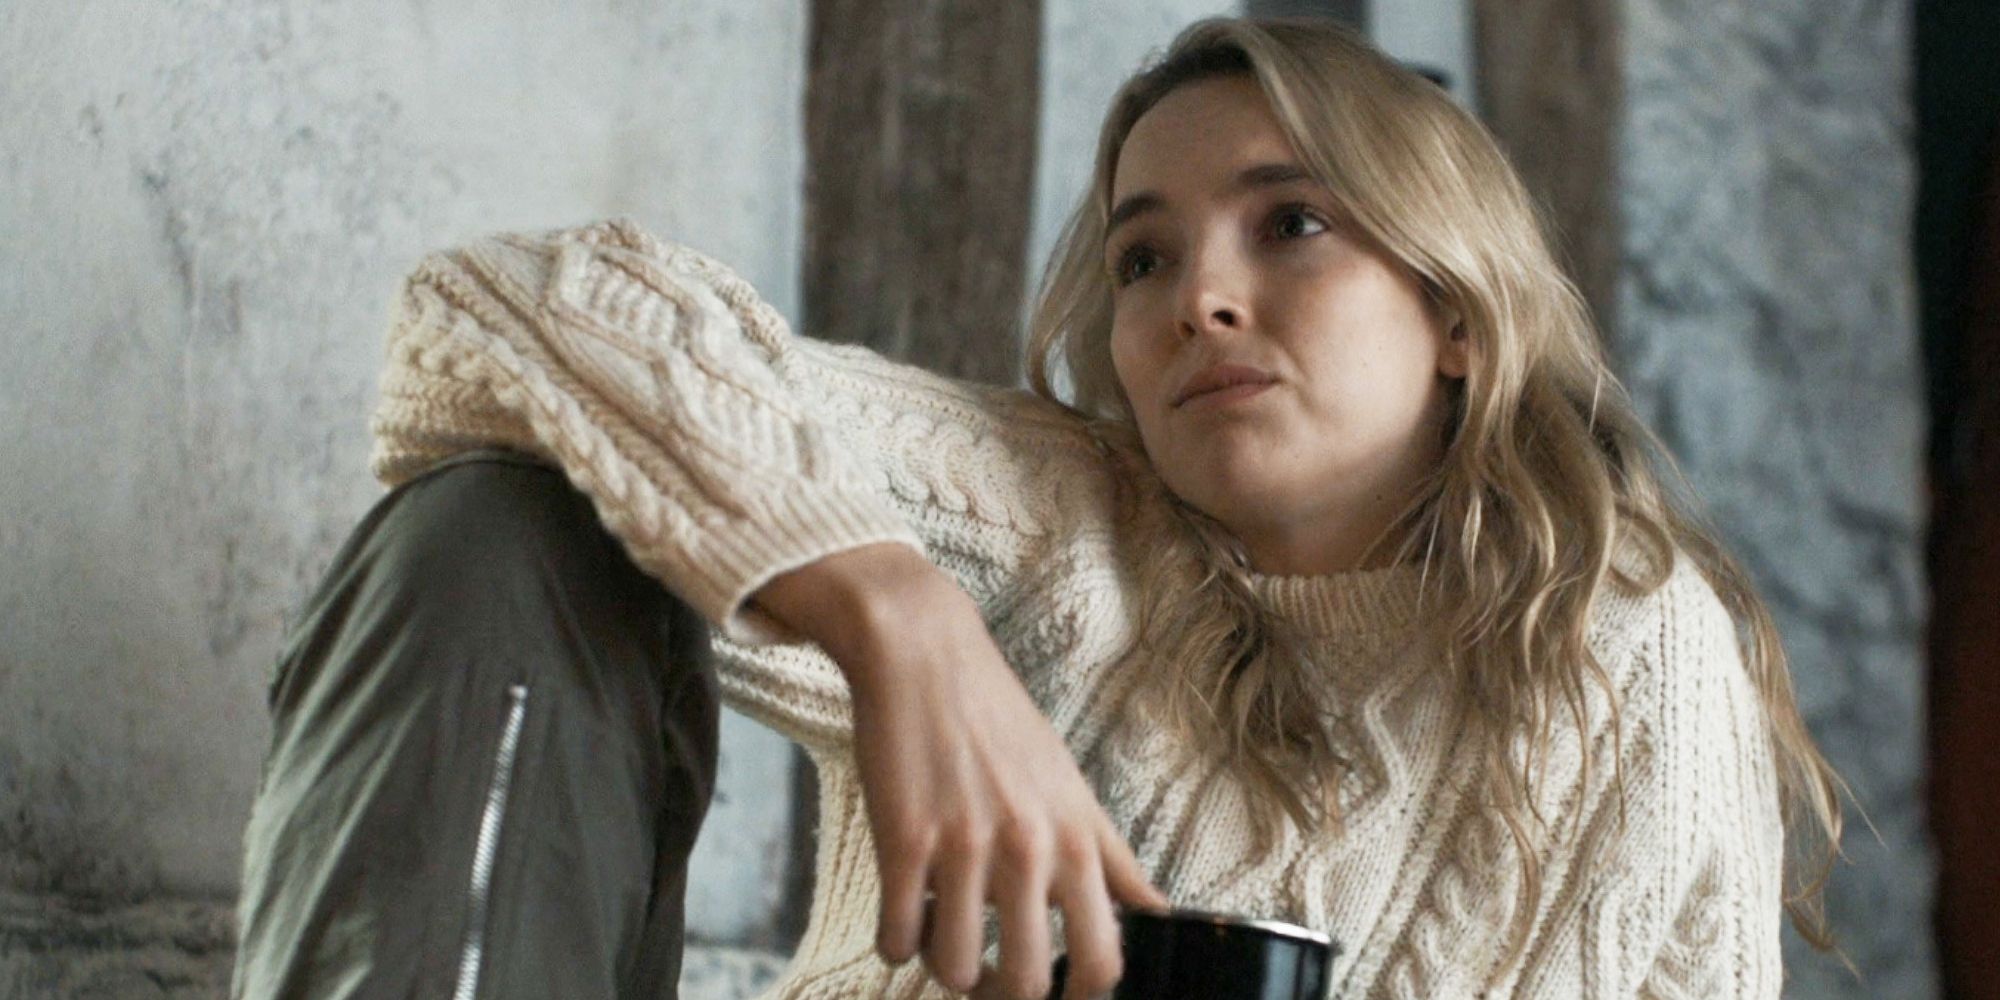 Villanelle lounging in a sweater while drinking from a mug